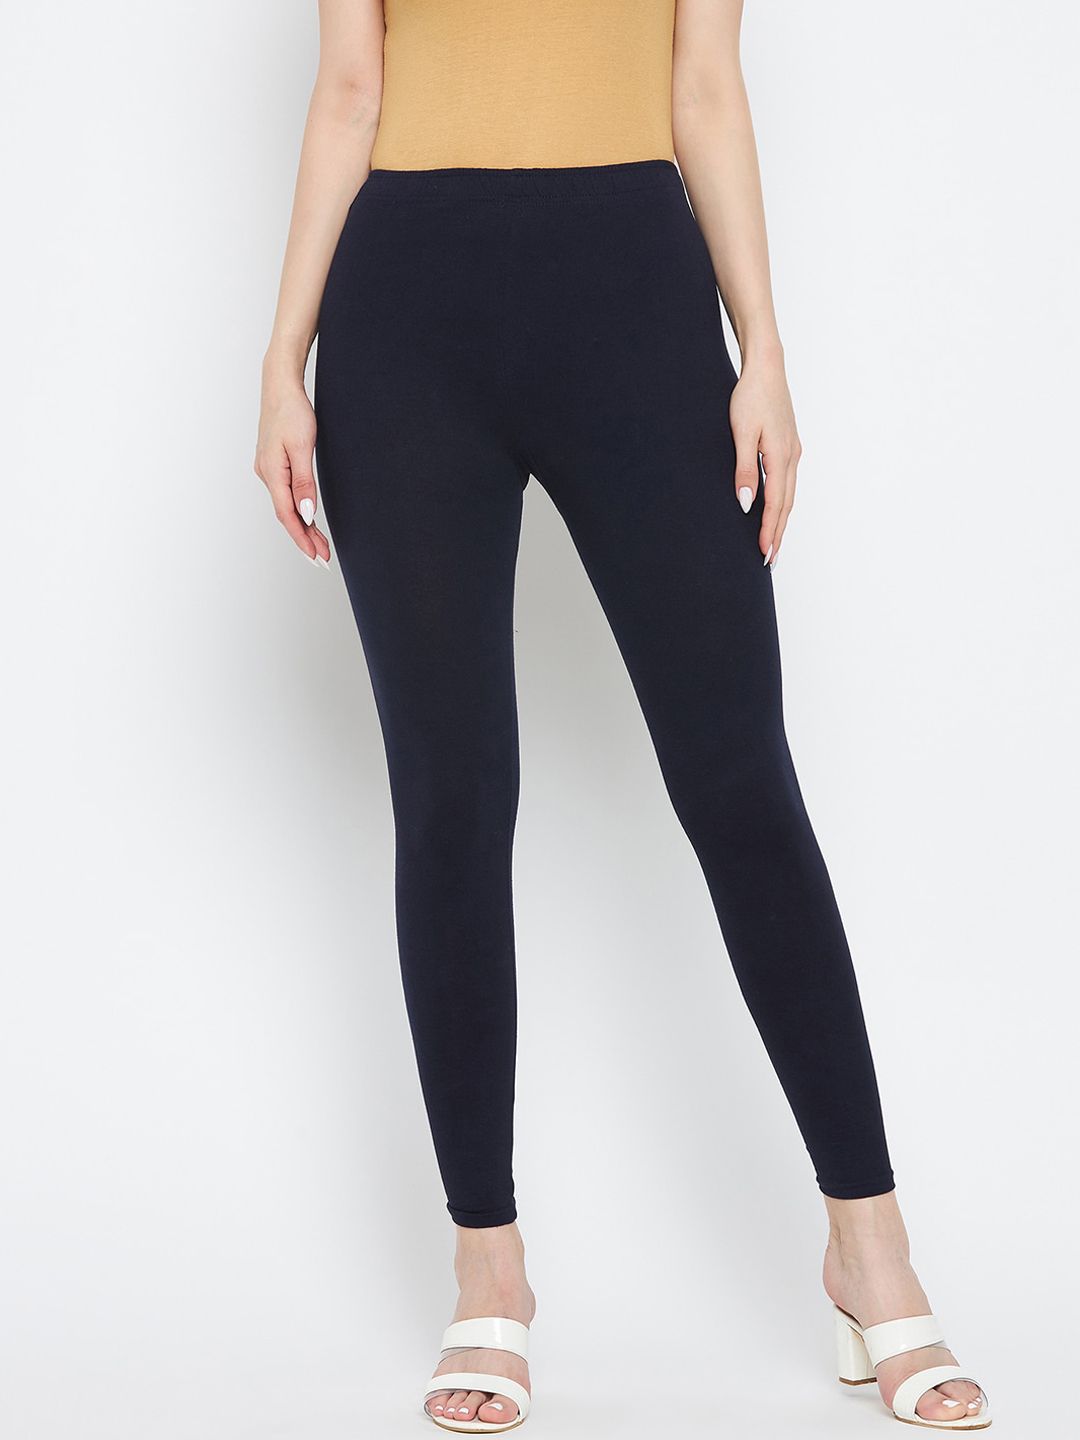 Clora Creation Women Navy Blue Solid Ankle Length Leggings Price in India